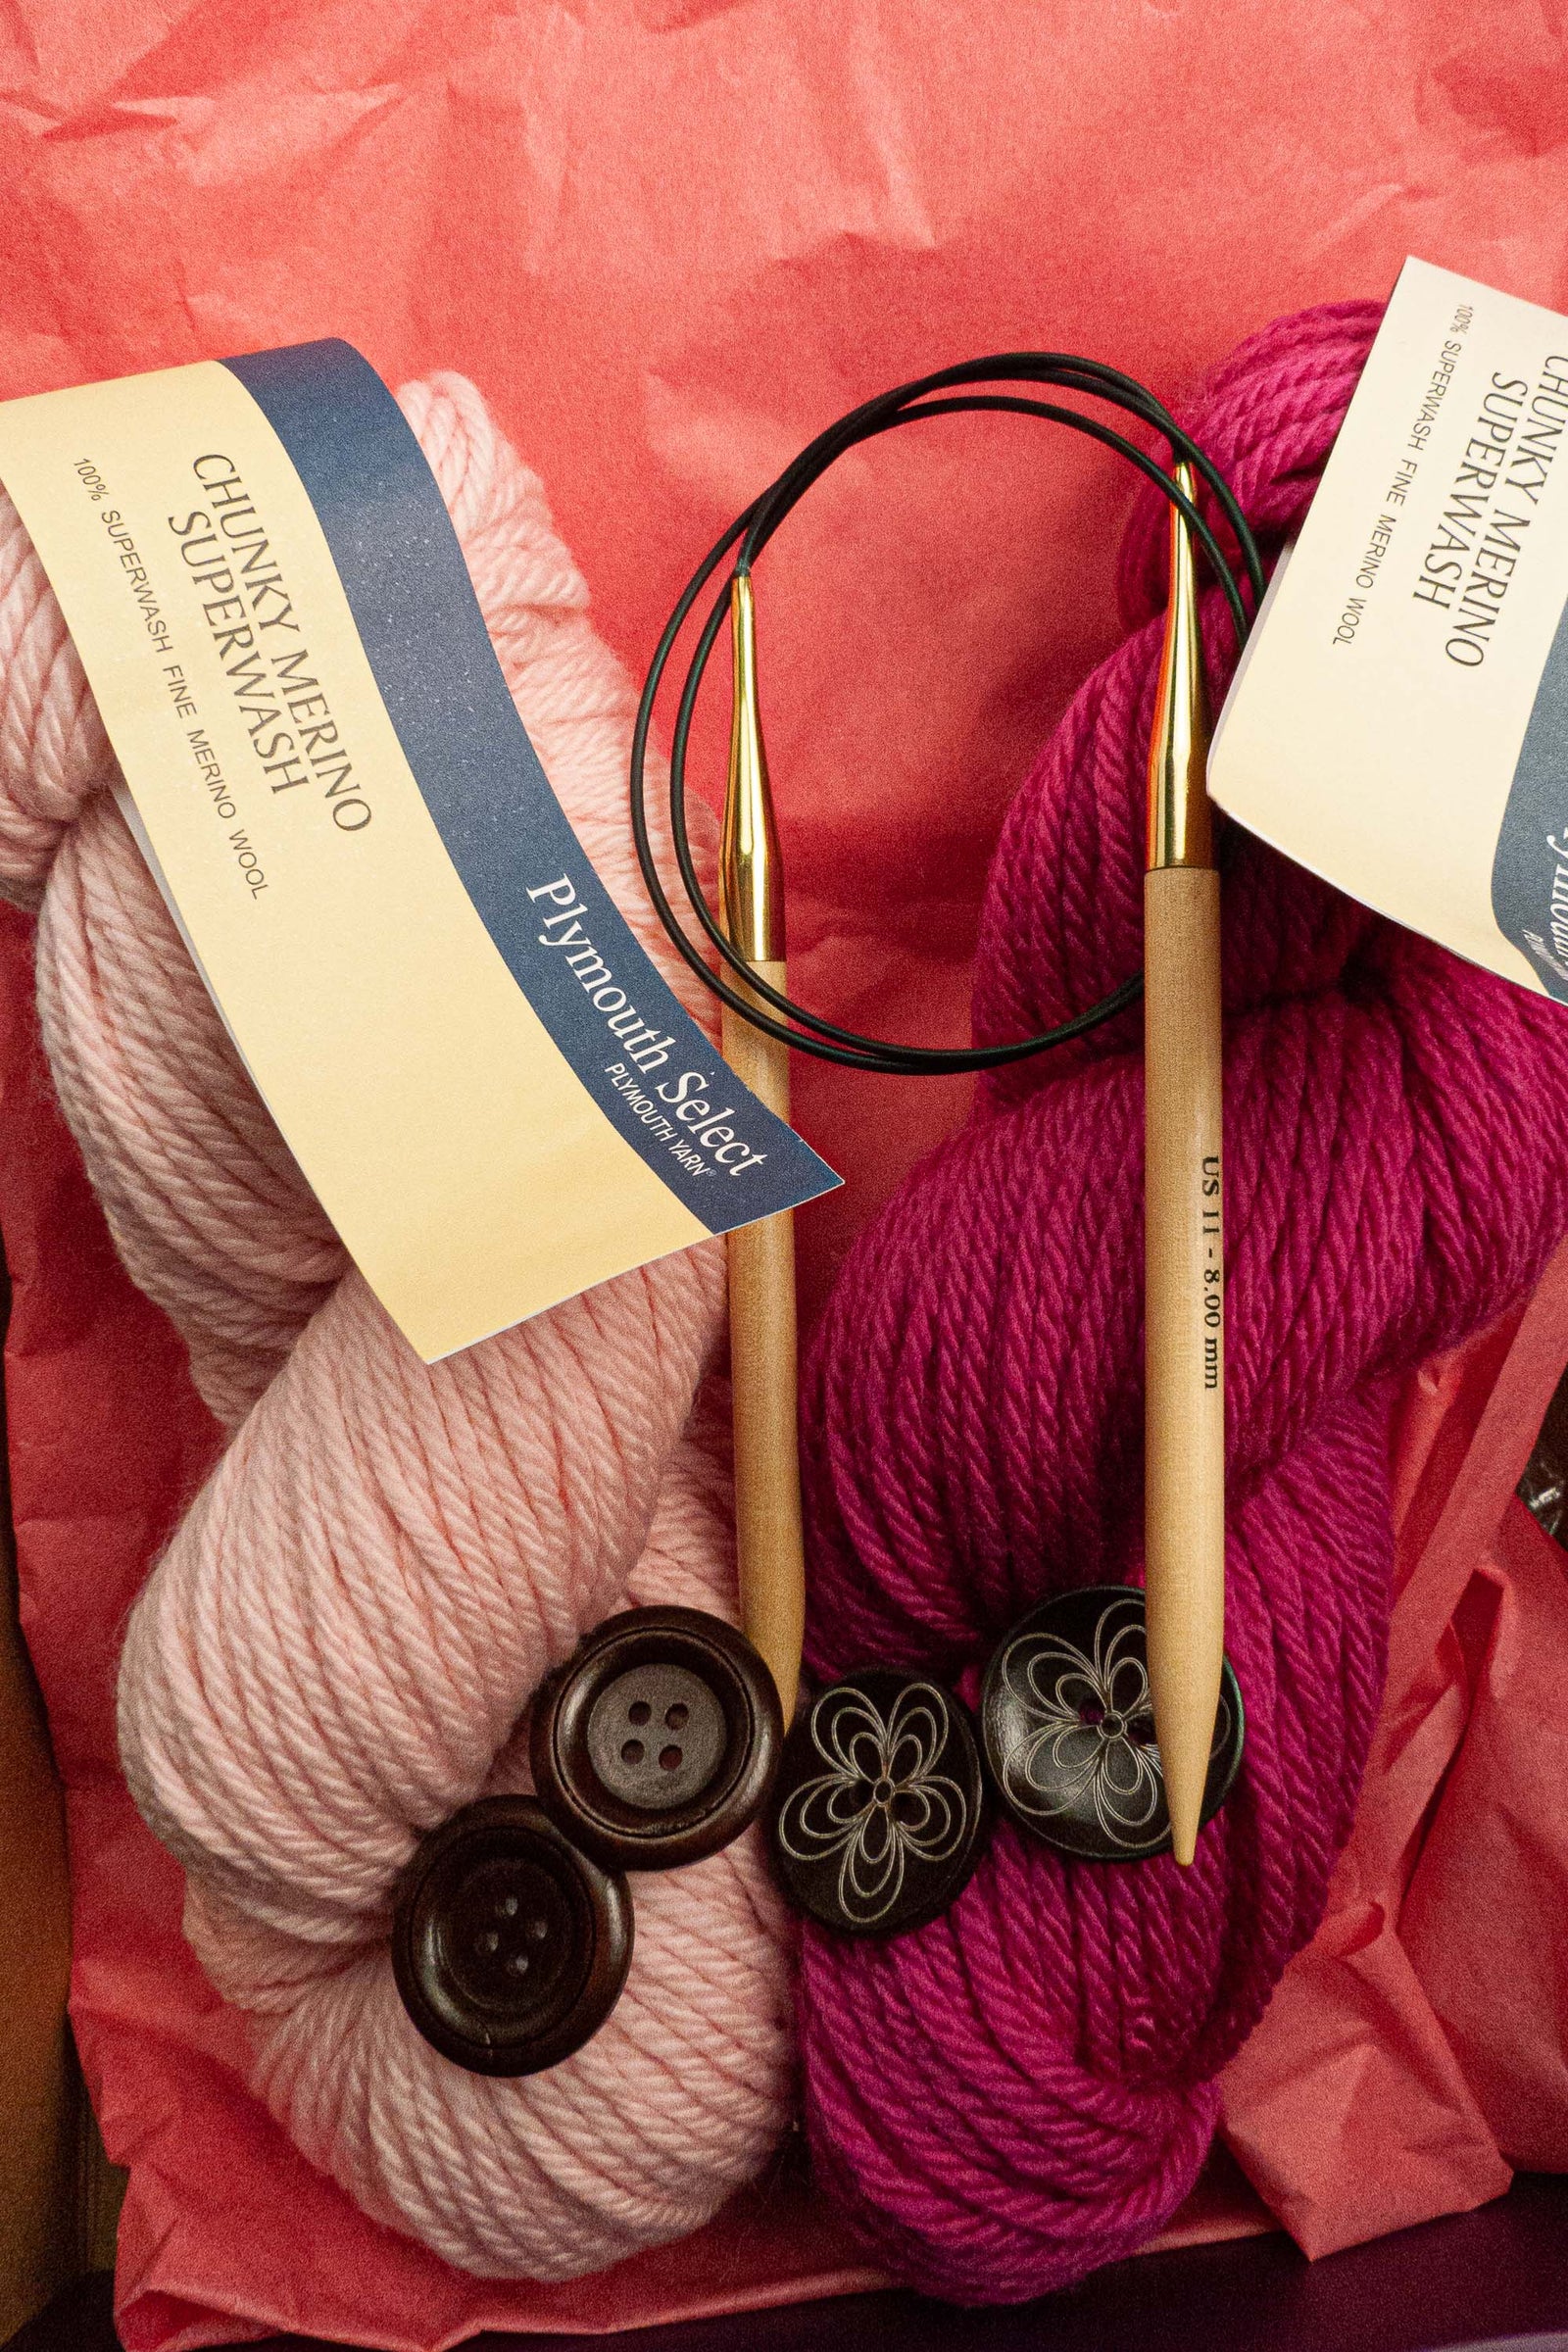 Learn to Knit Kit – Northwest Wools